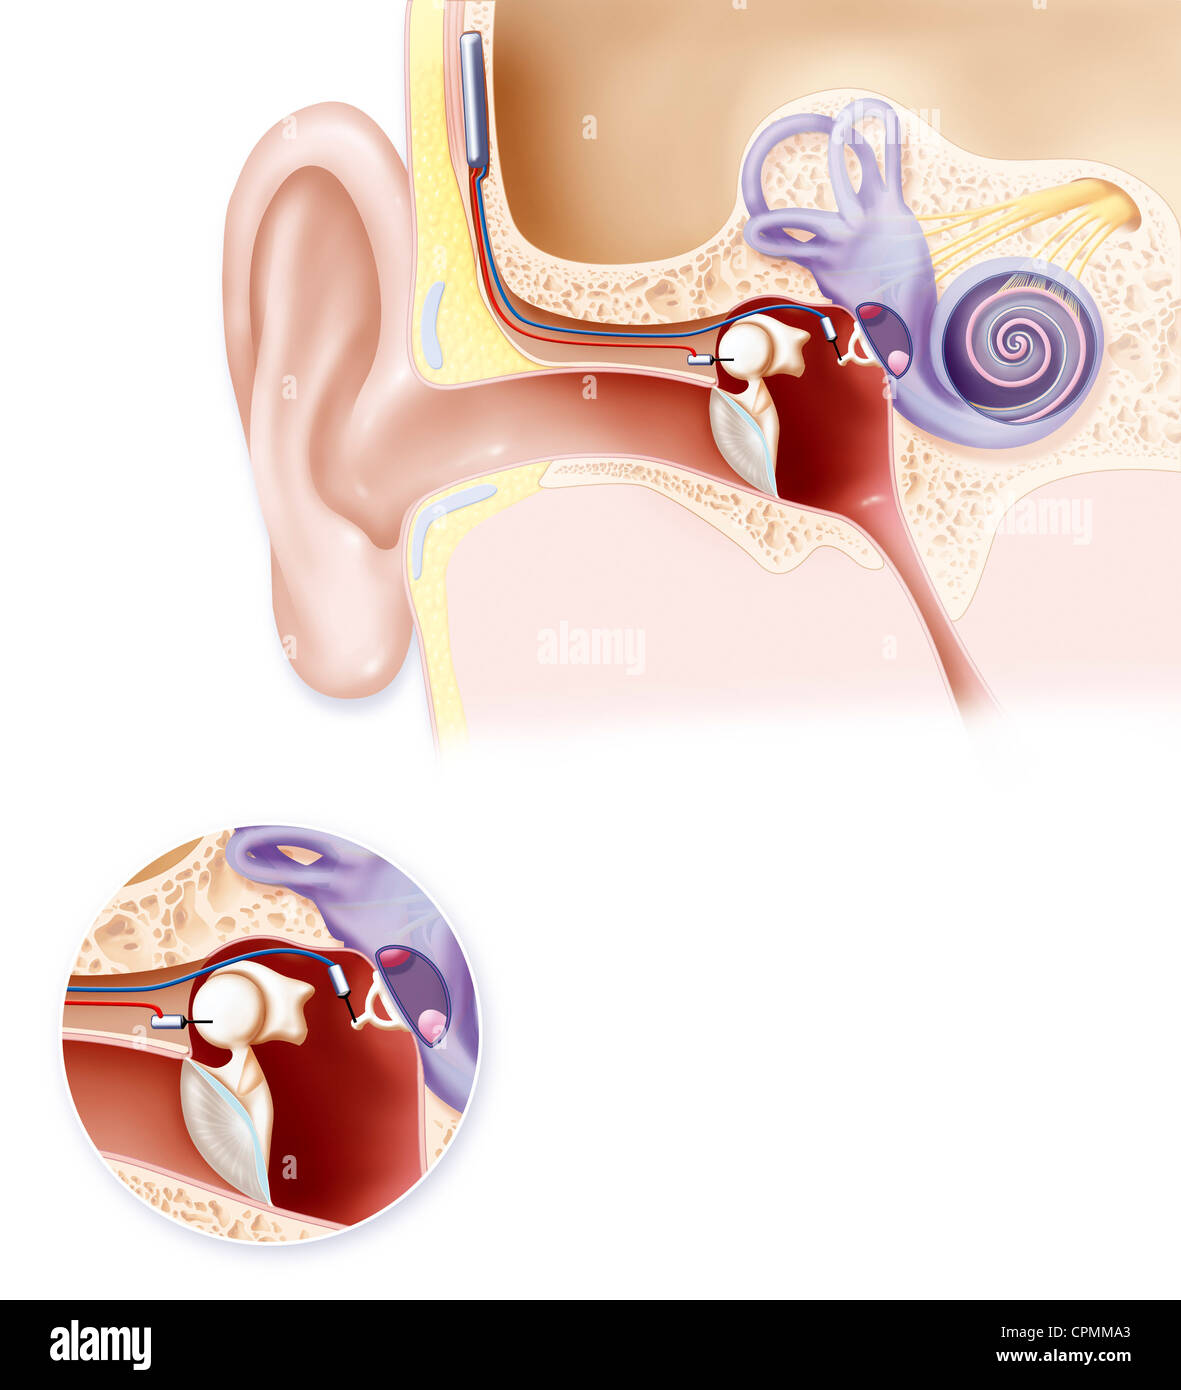 COCHLEAL IMPLANT Stock Photo